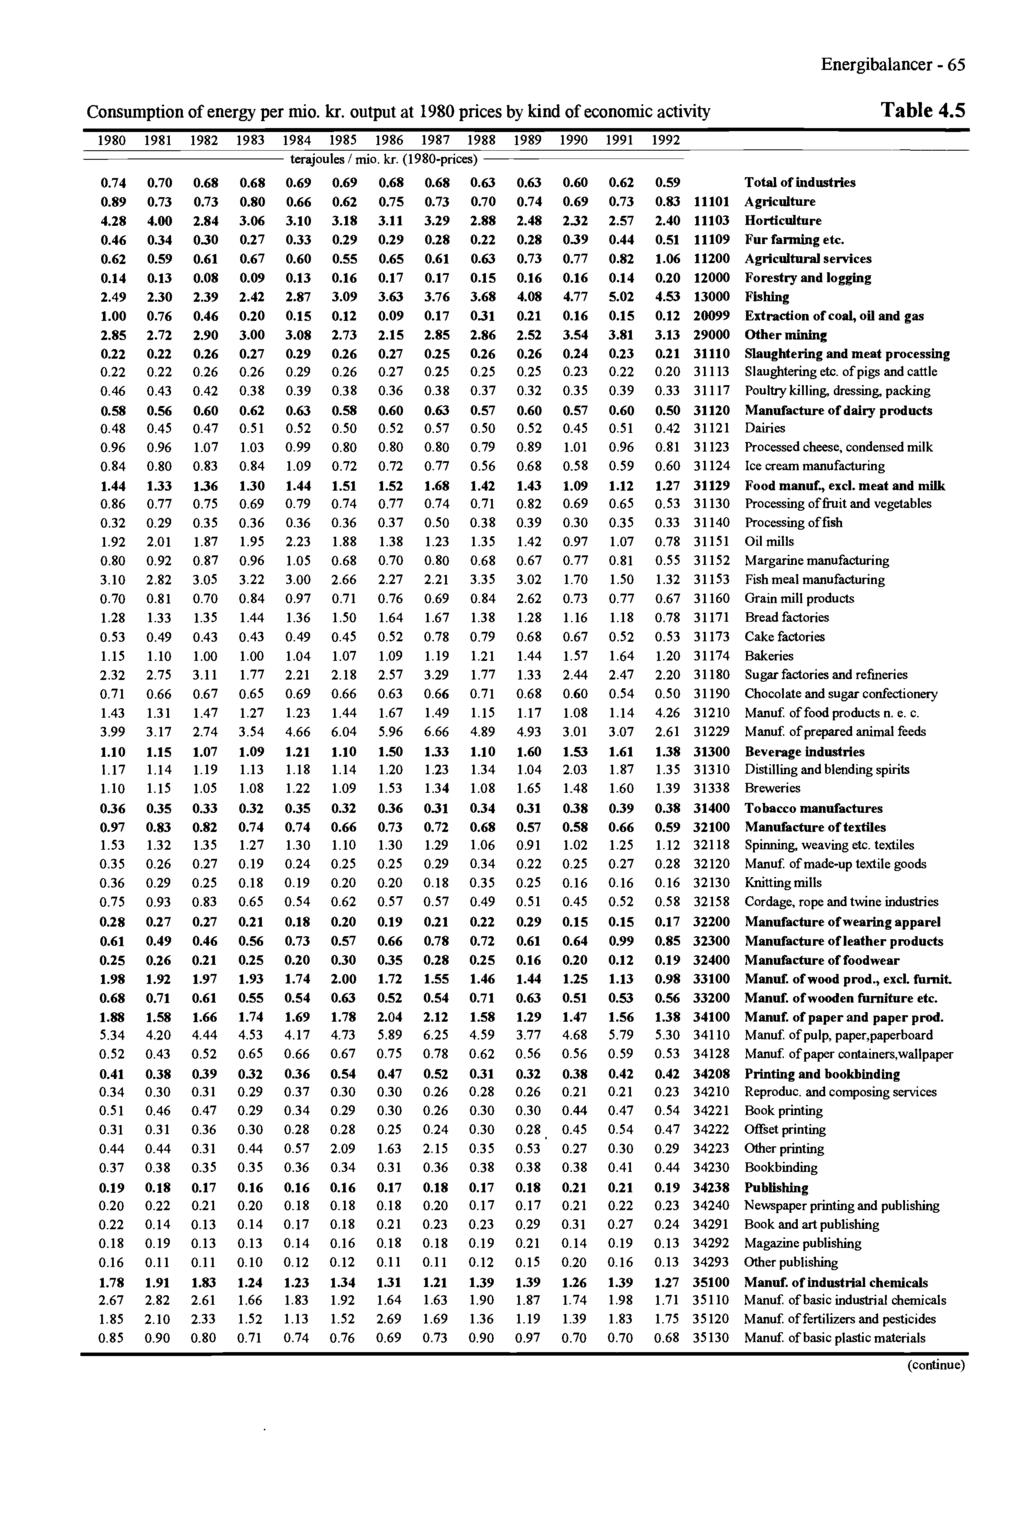 Energibalancer 65 Consumption of energy per mio. kr. output at 1980 prices by kind of economic activity Table 4.5 1980 1981 1982 1983 1984 1985 1986 1987 1988 1989 1990 1991 1992 terajoules / mio. kr. (1980 prices) 0.